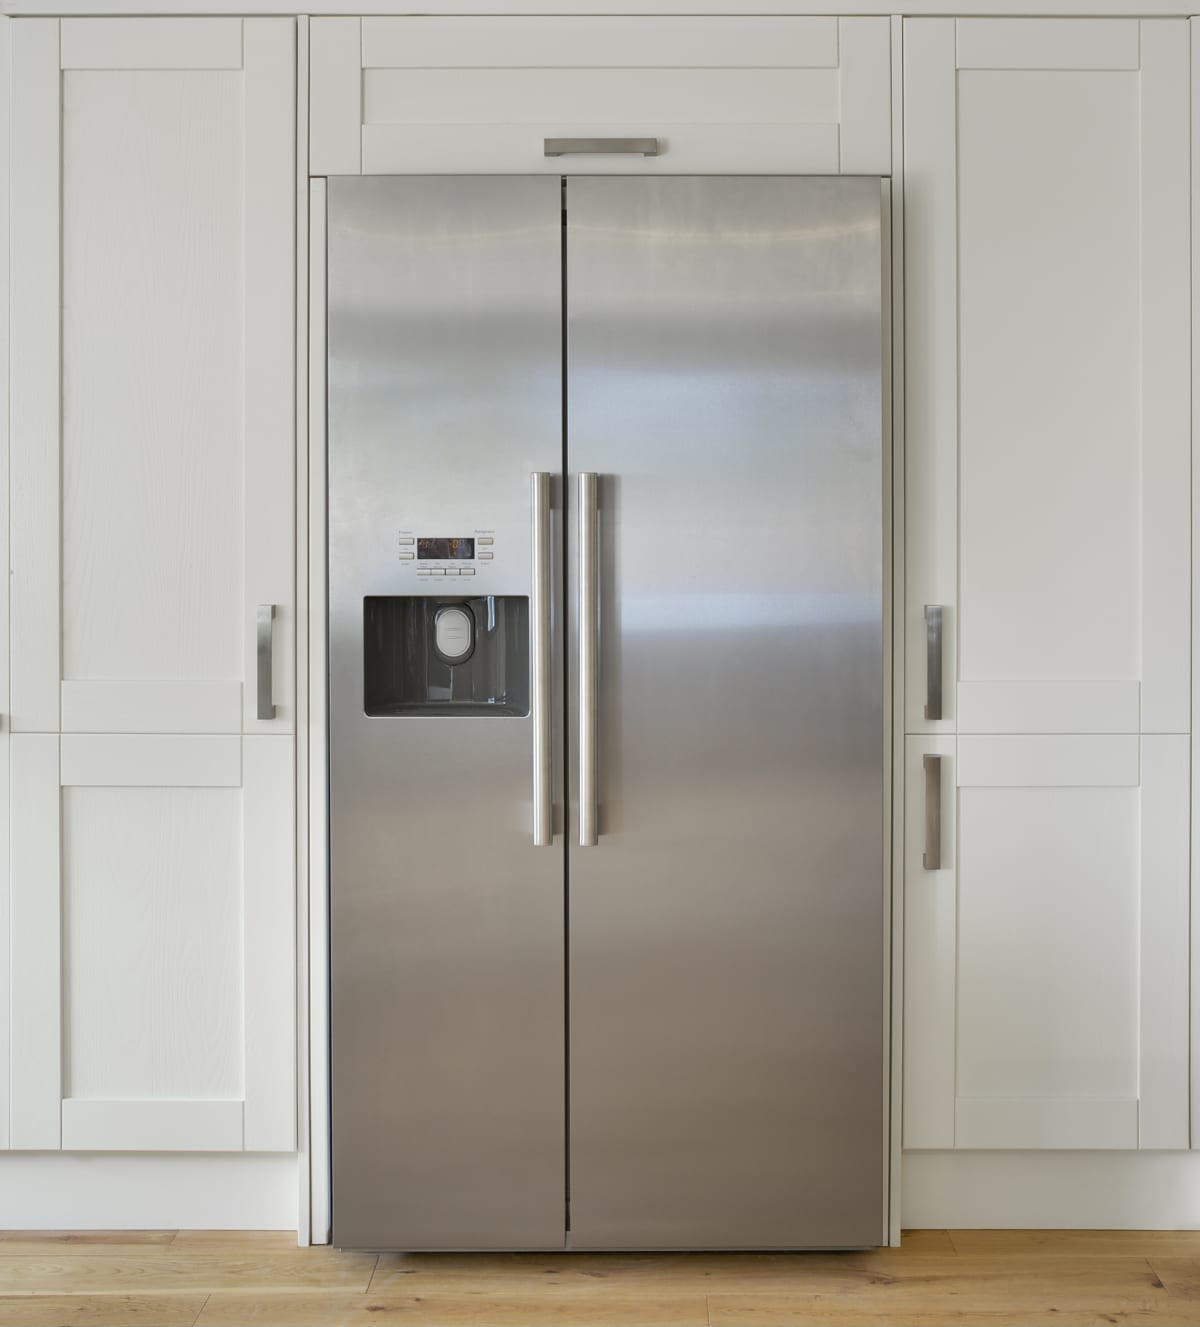 "a modern American fridge freezer set into a bank of cream coloured cupboards in a farmhouse-style kitchen. Made from brushed stainless steel, this is a high quality unit with ice cube dispenser.Looking for a Kitchen, Dining Room or dining related image Then please see my other images by clicking on the Lightbox link below..."